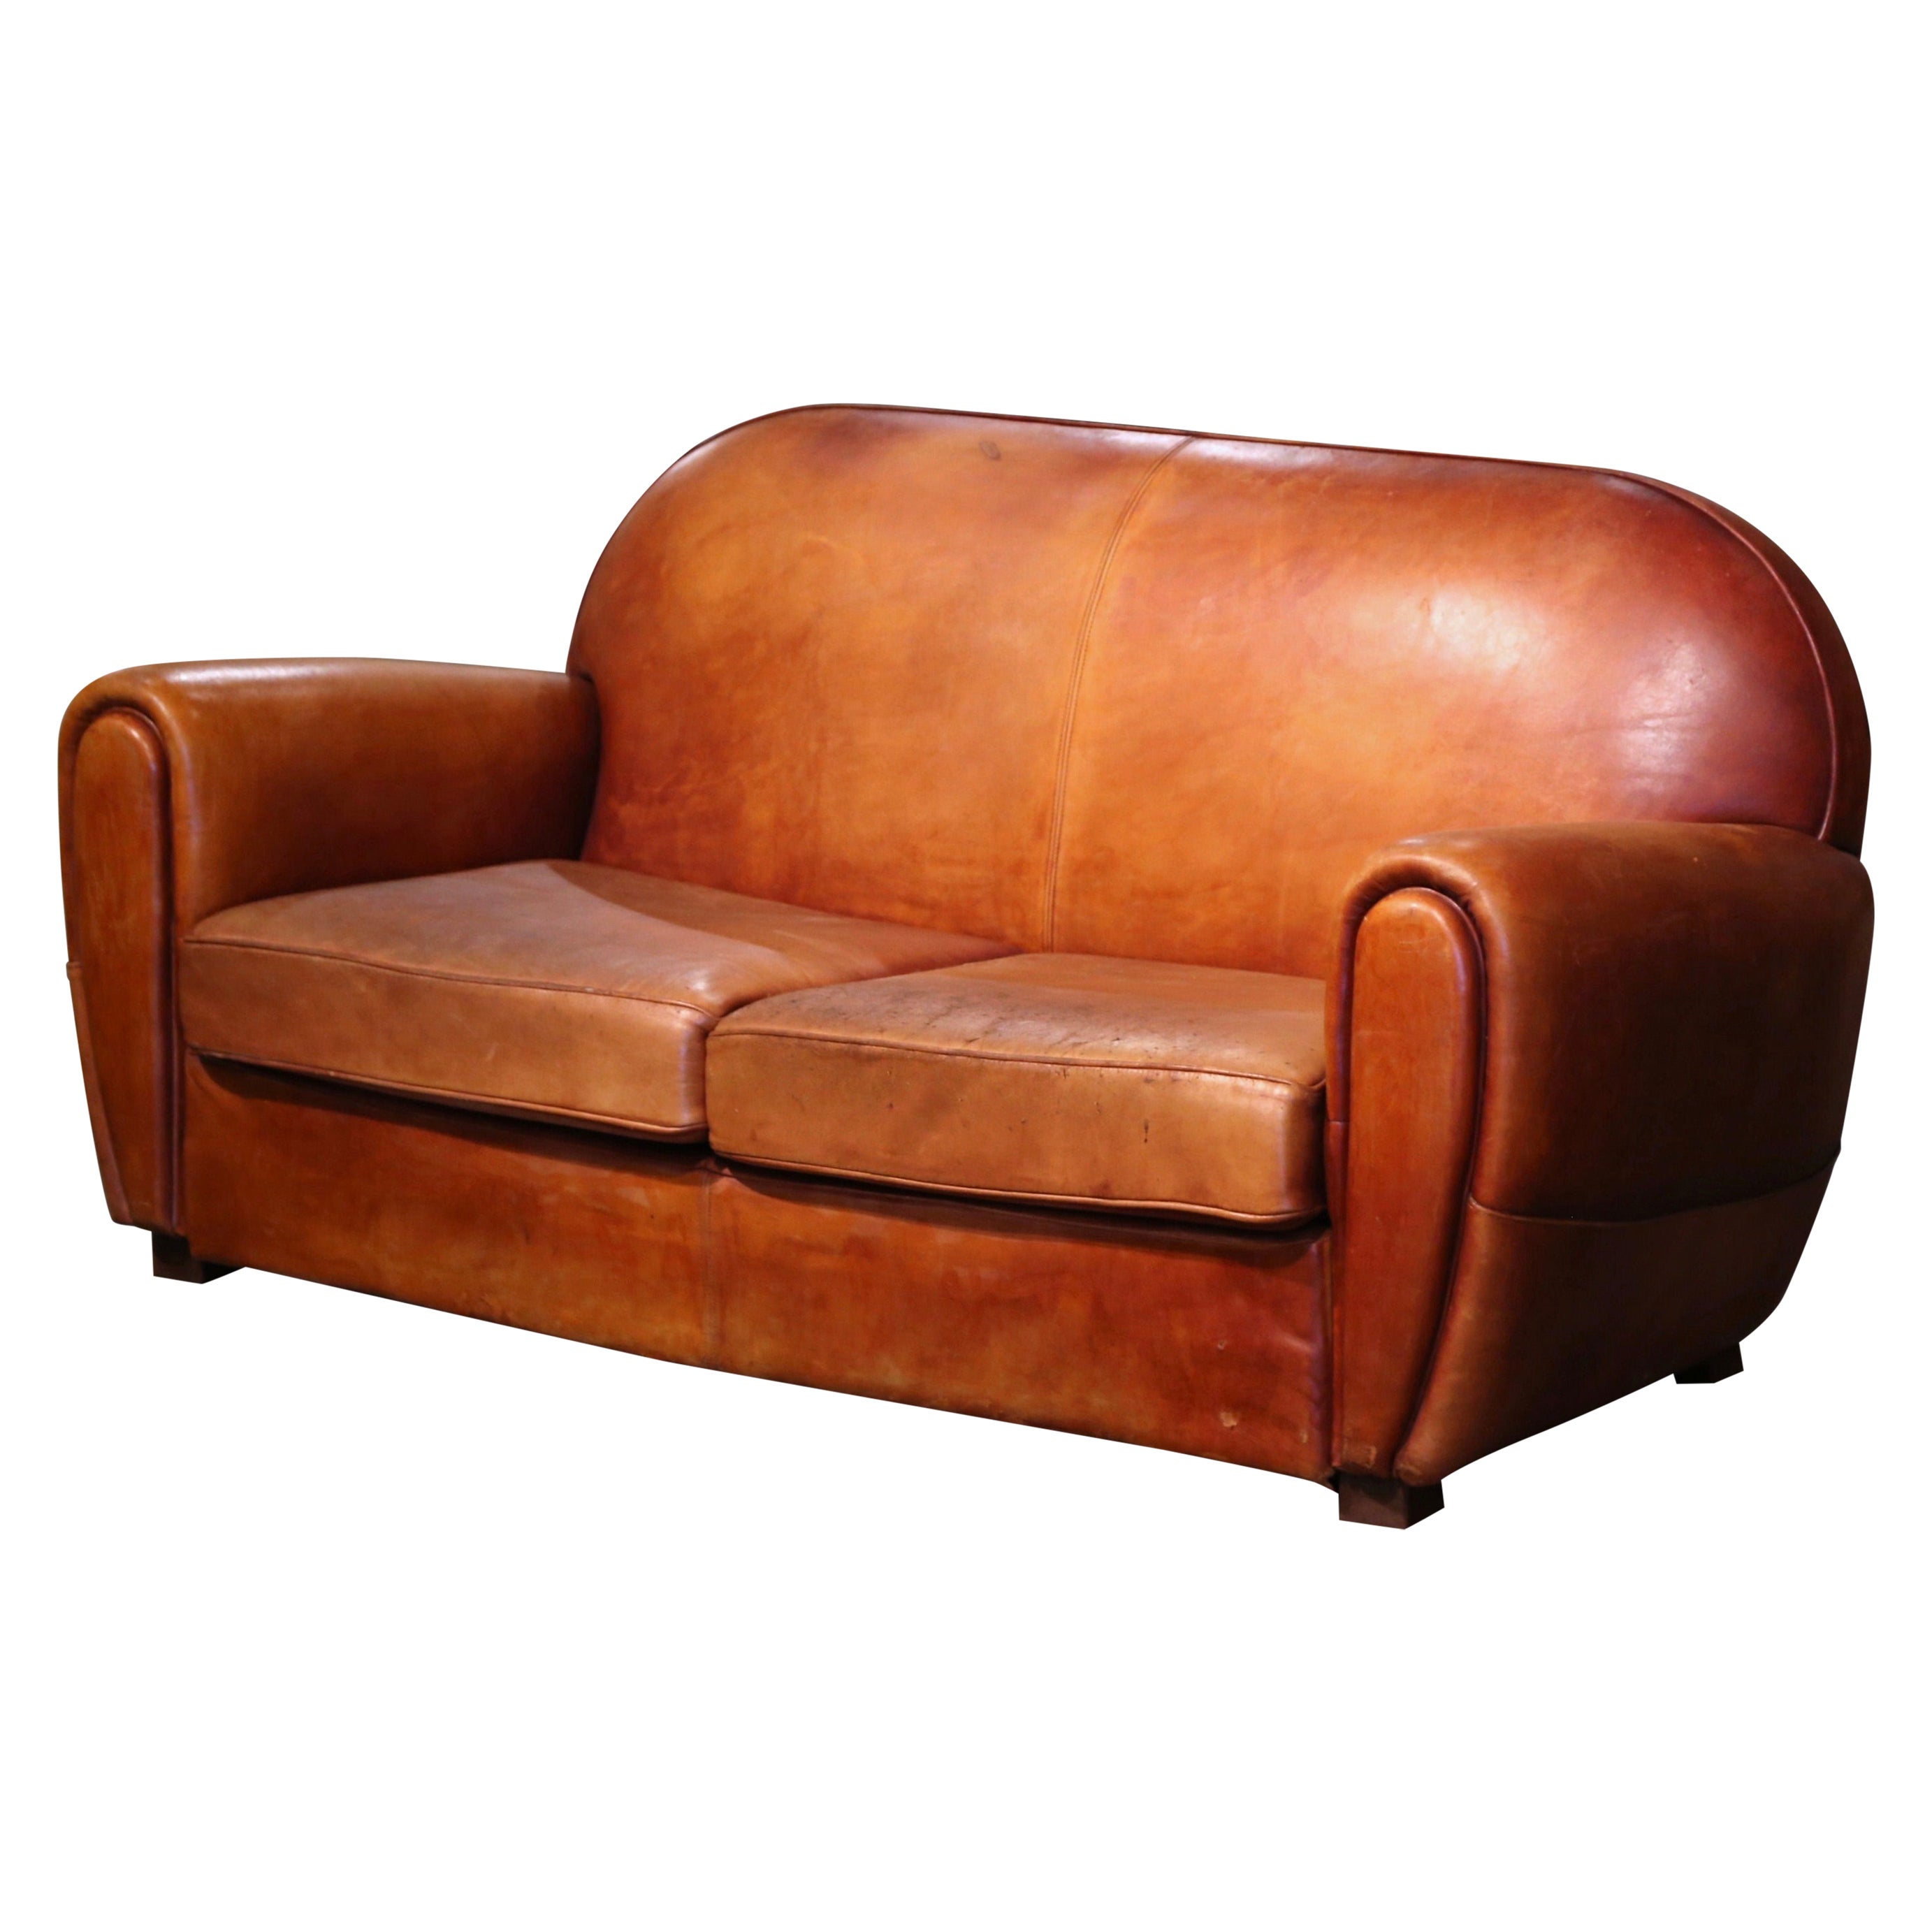 Early 20th Century French Art-Deco Brown Leather Two-Seat Club Sofa